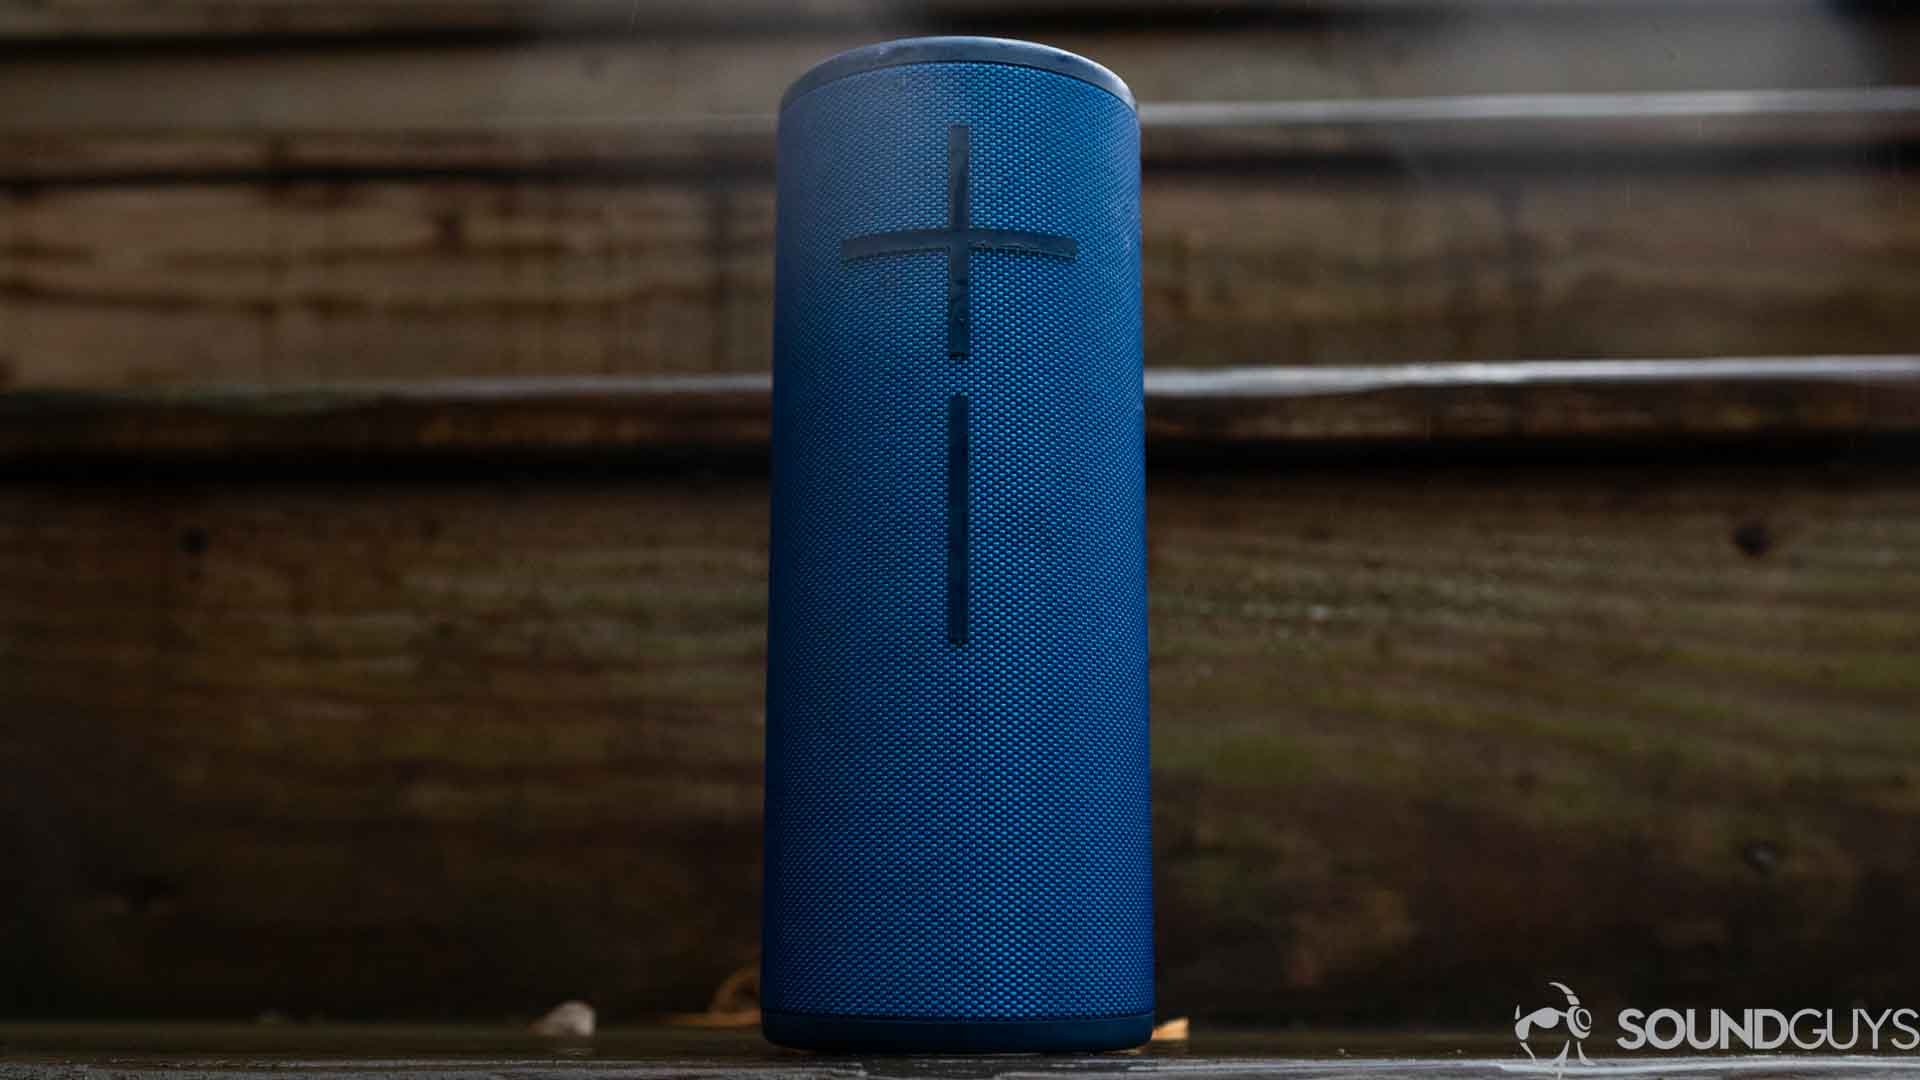 Ultimate Ears Boom 3 speaker review: Great sound in a stylish body